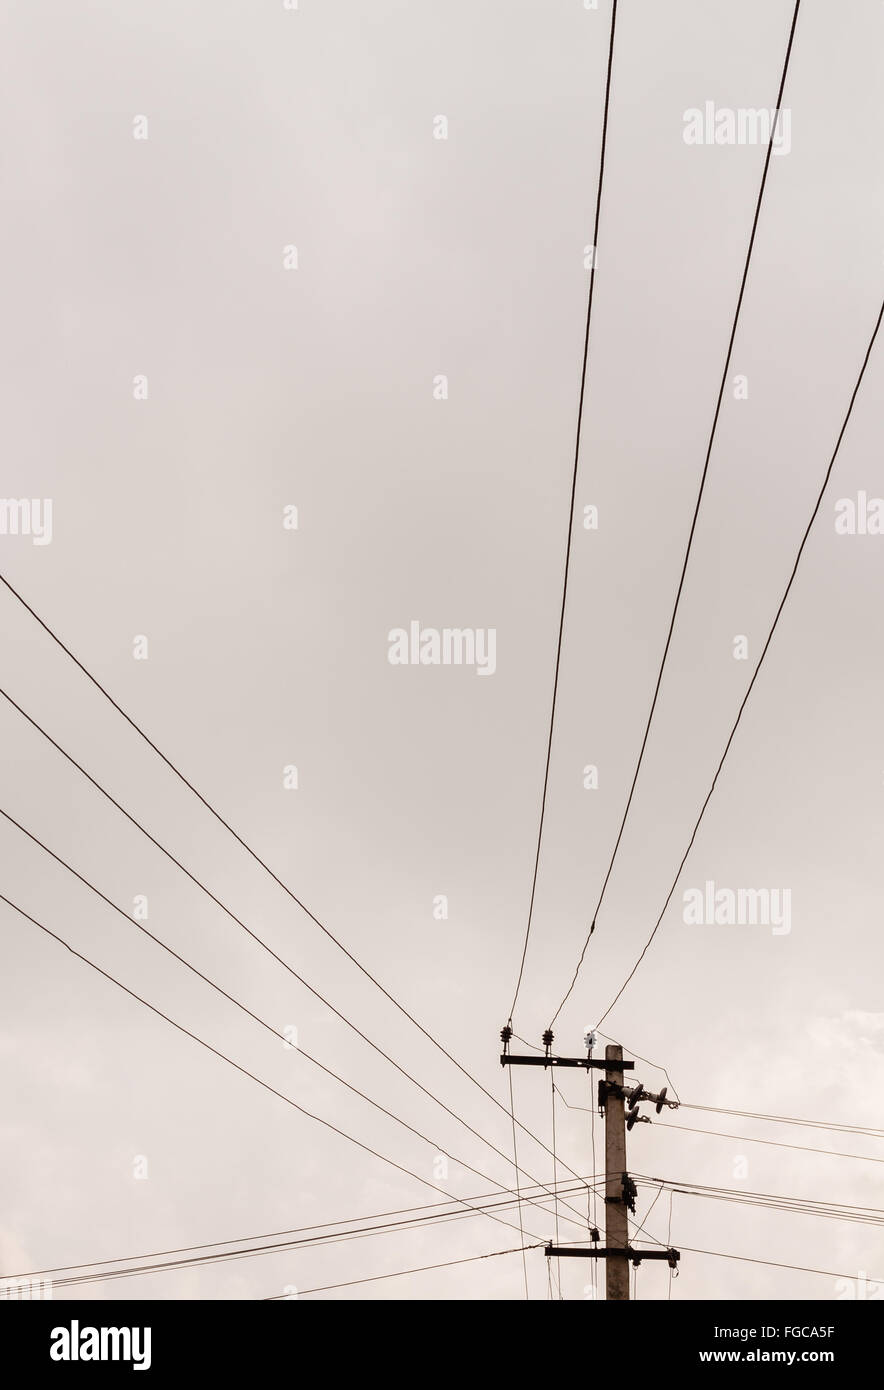 Power transmission lines from a transmission pole run across the sky covered with dark grey rain clouds. Stock Photo